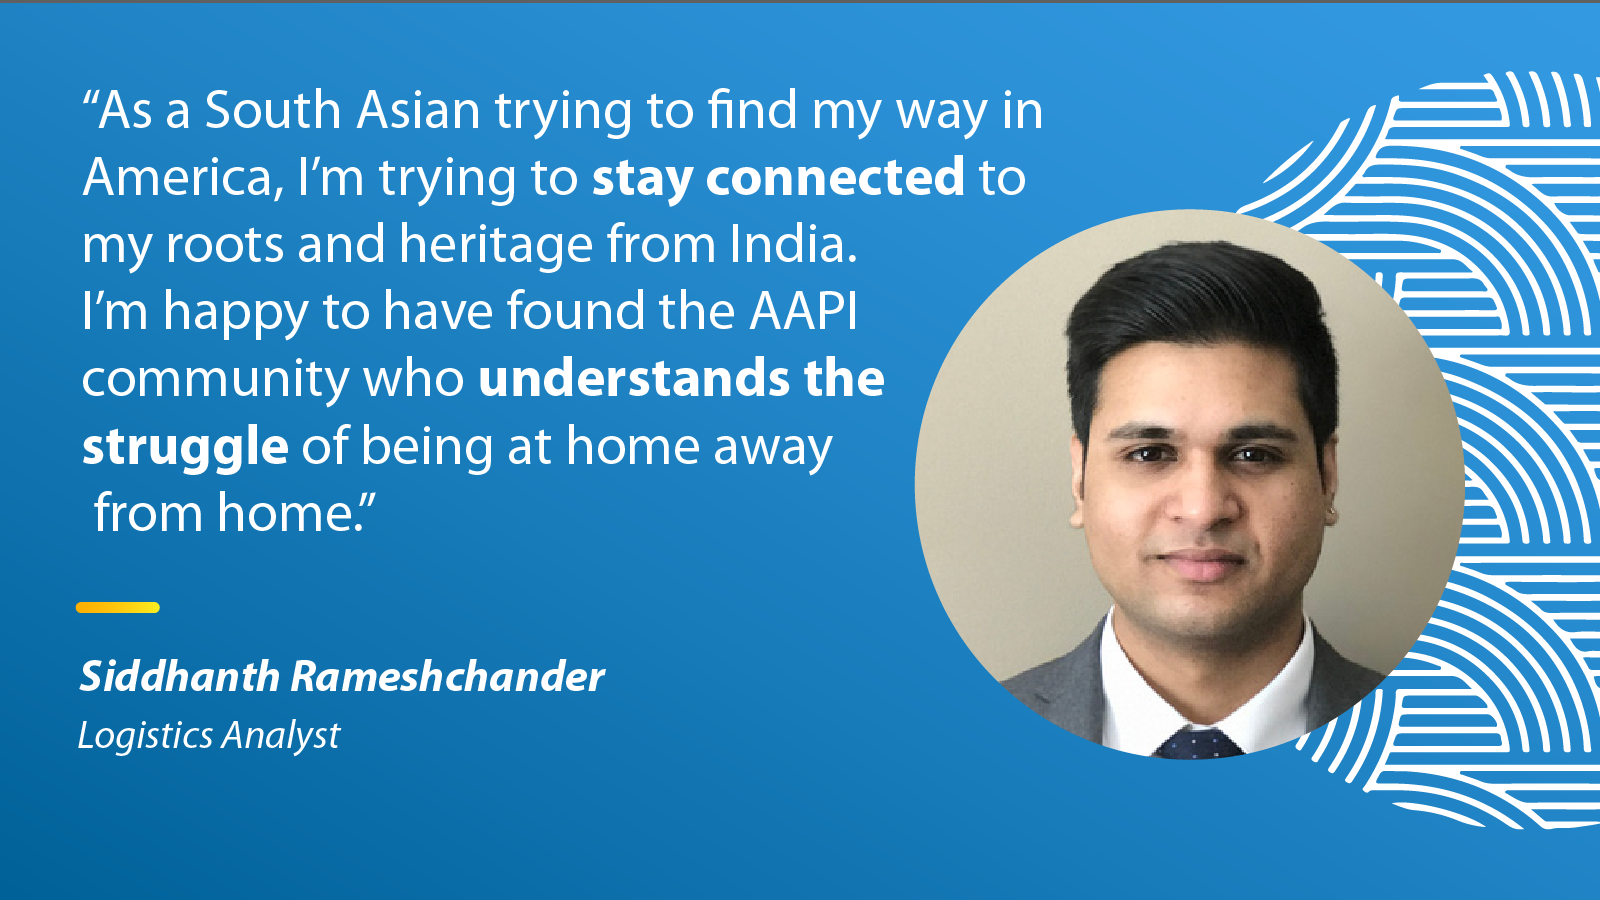 "As a South Asian trying to find my way in America, I'm trying to stay connected to my roots and heritage from India. I'm happy to have found the AAPI community who understands the struggle of being at home." - Siddhanth Rameshchander, Logistics Analytics